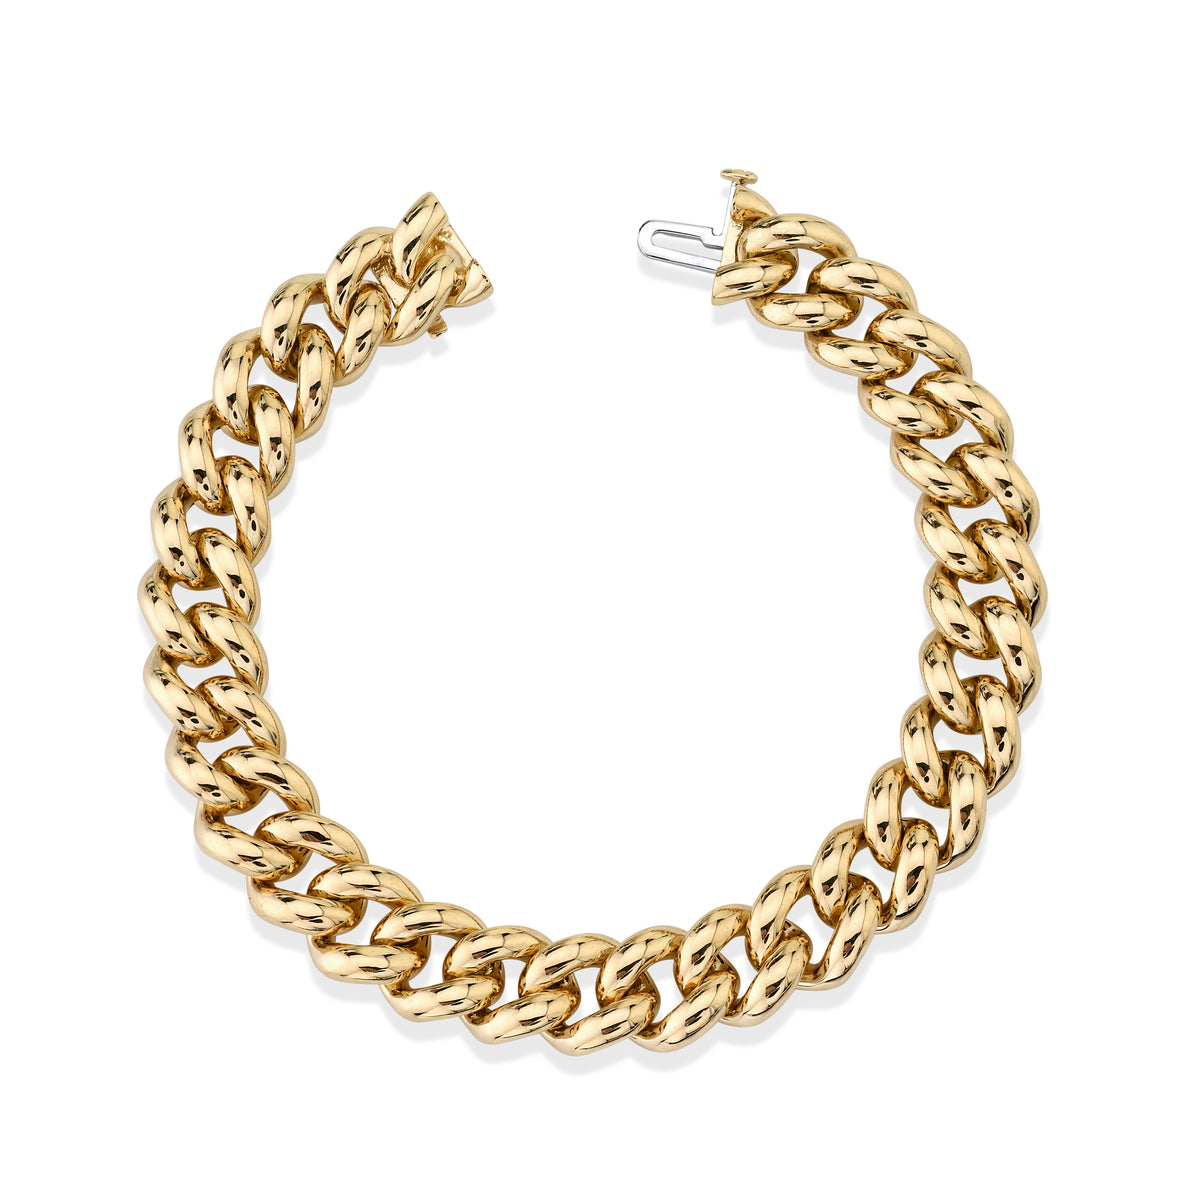 READY TO SHIP SOLID GOLD ESSENTIAL LINK BRACELET